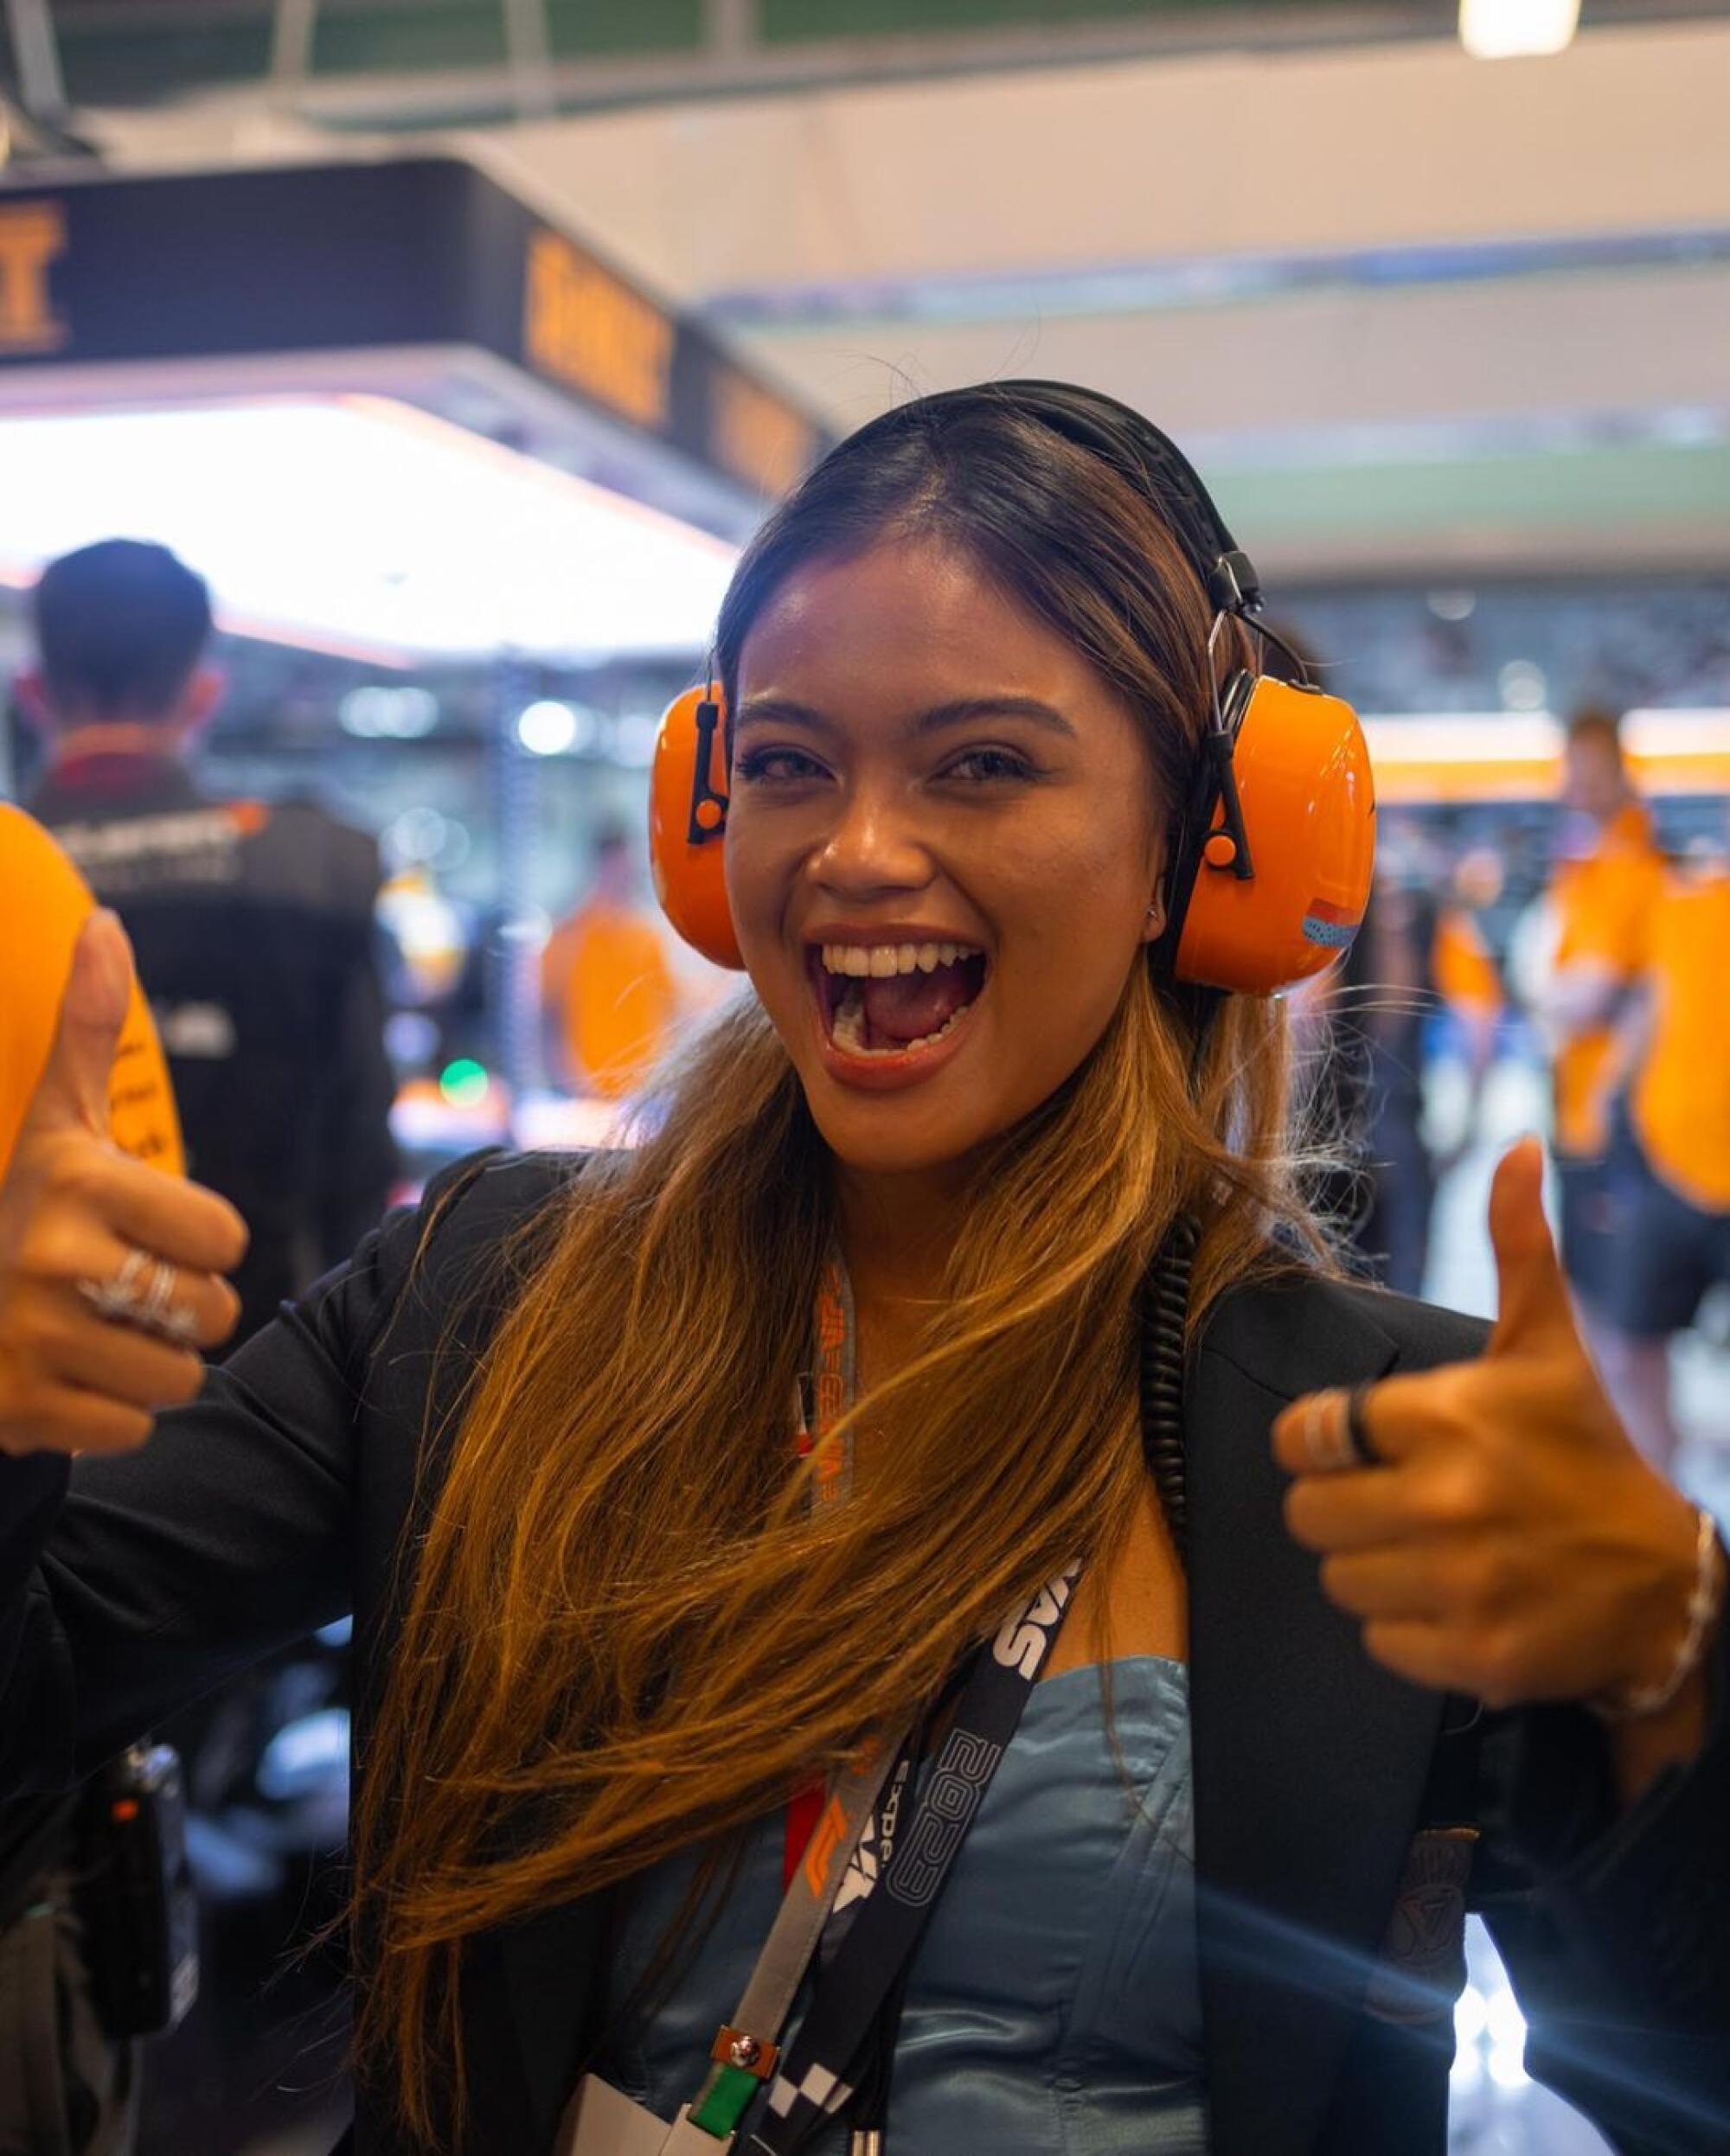 Bianca Bustamante gives a thumbs up while standing in the McLaren garage during a Formula One race weekend.